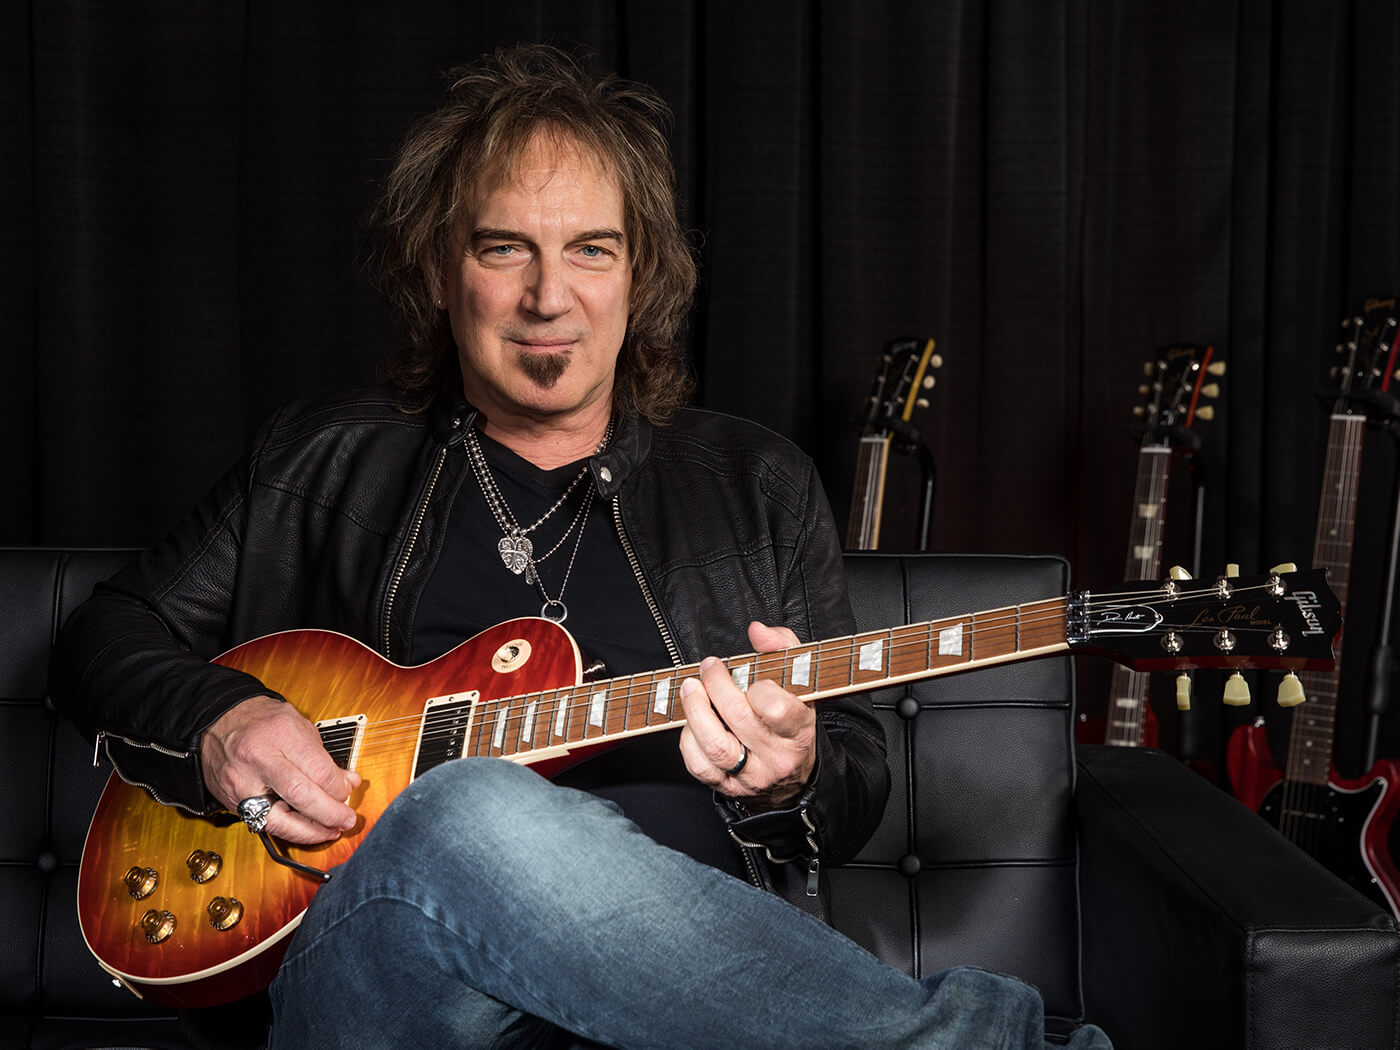 Gibson Dave Amato Les Paul Axcess Standard sat on couch